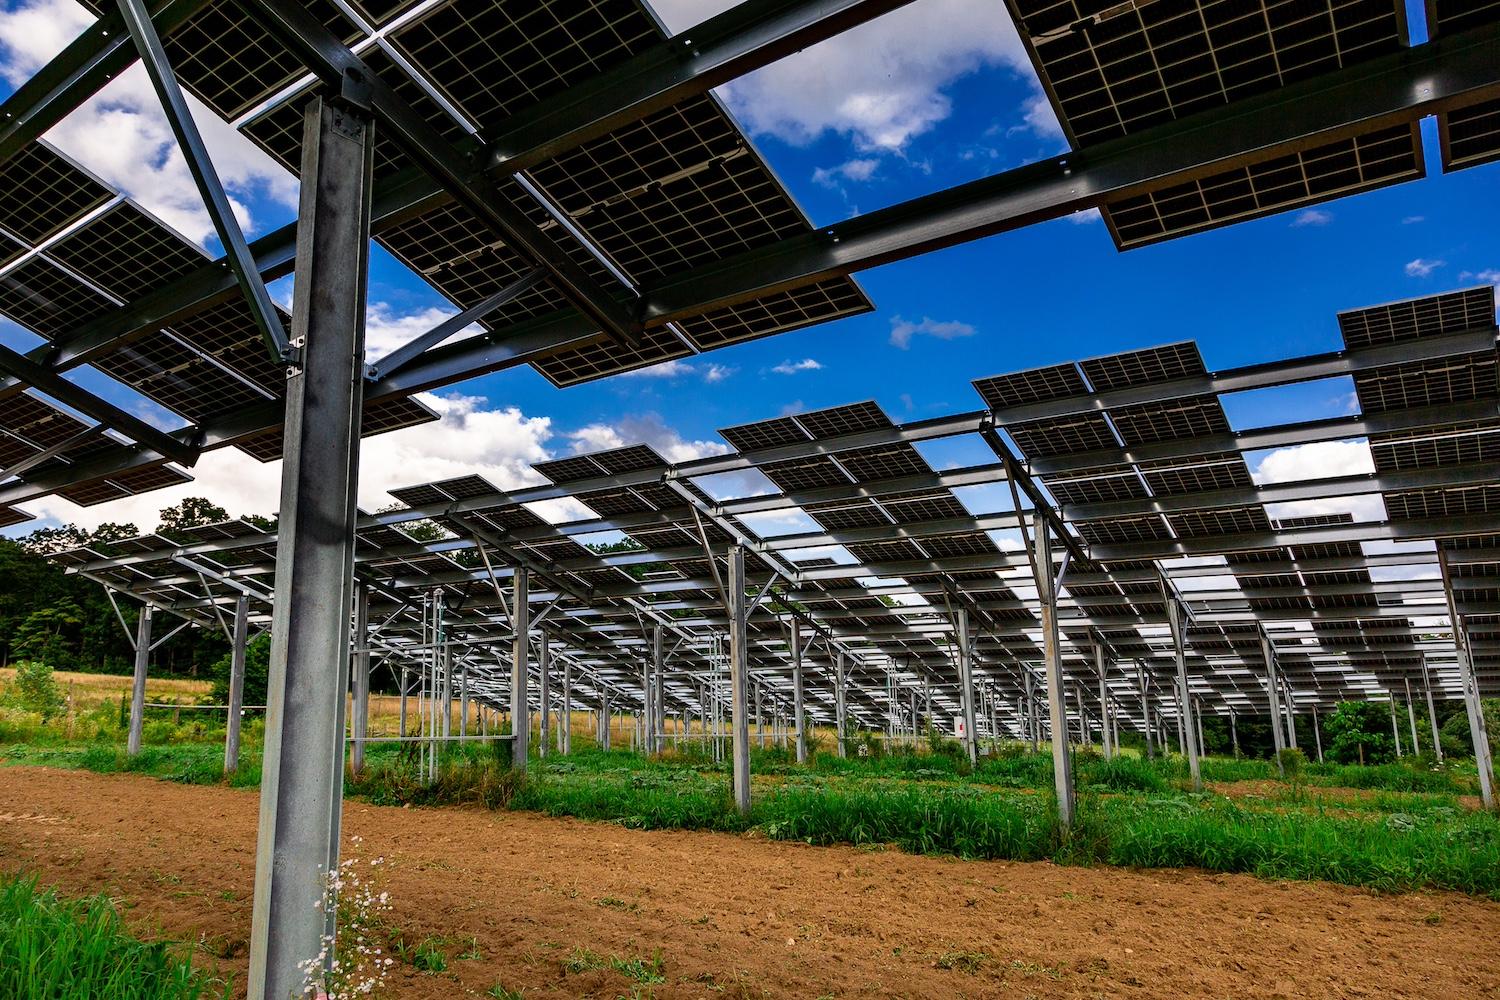 A farm practicing agrivoltaics by growing crops under raised solar panels.